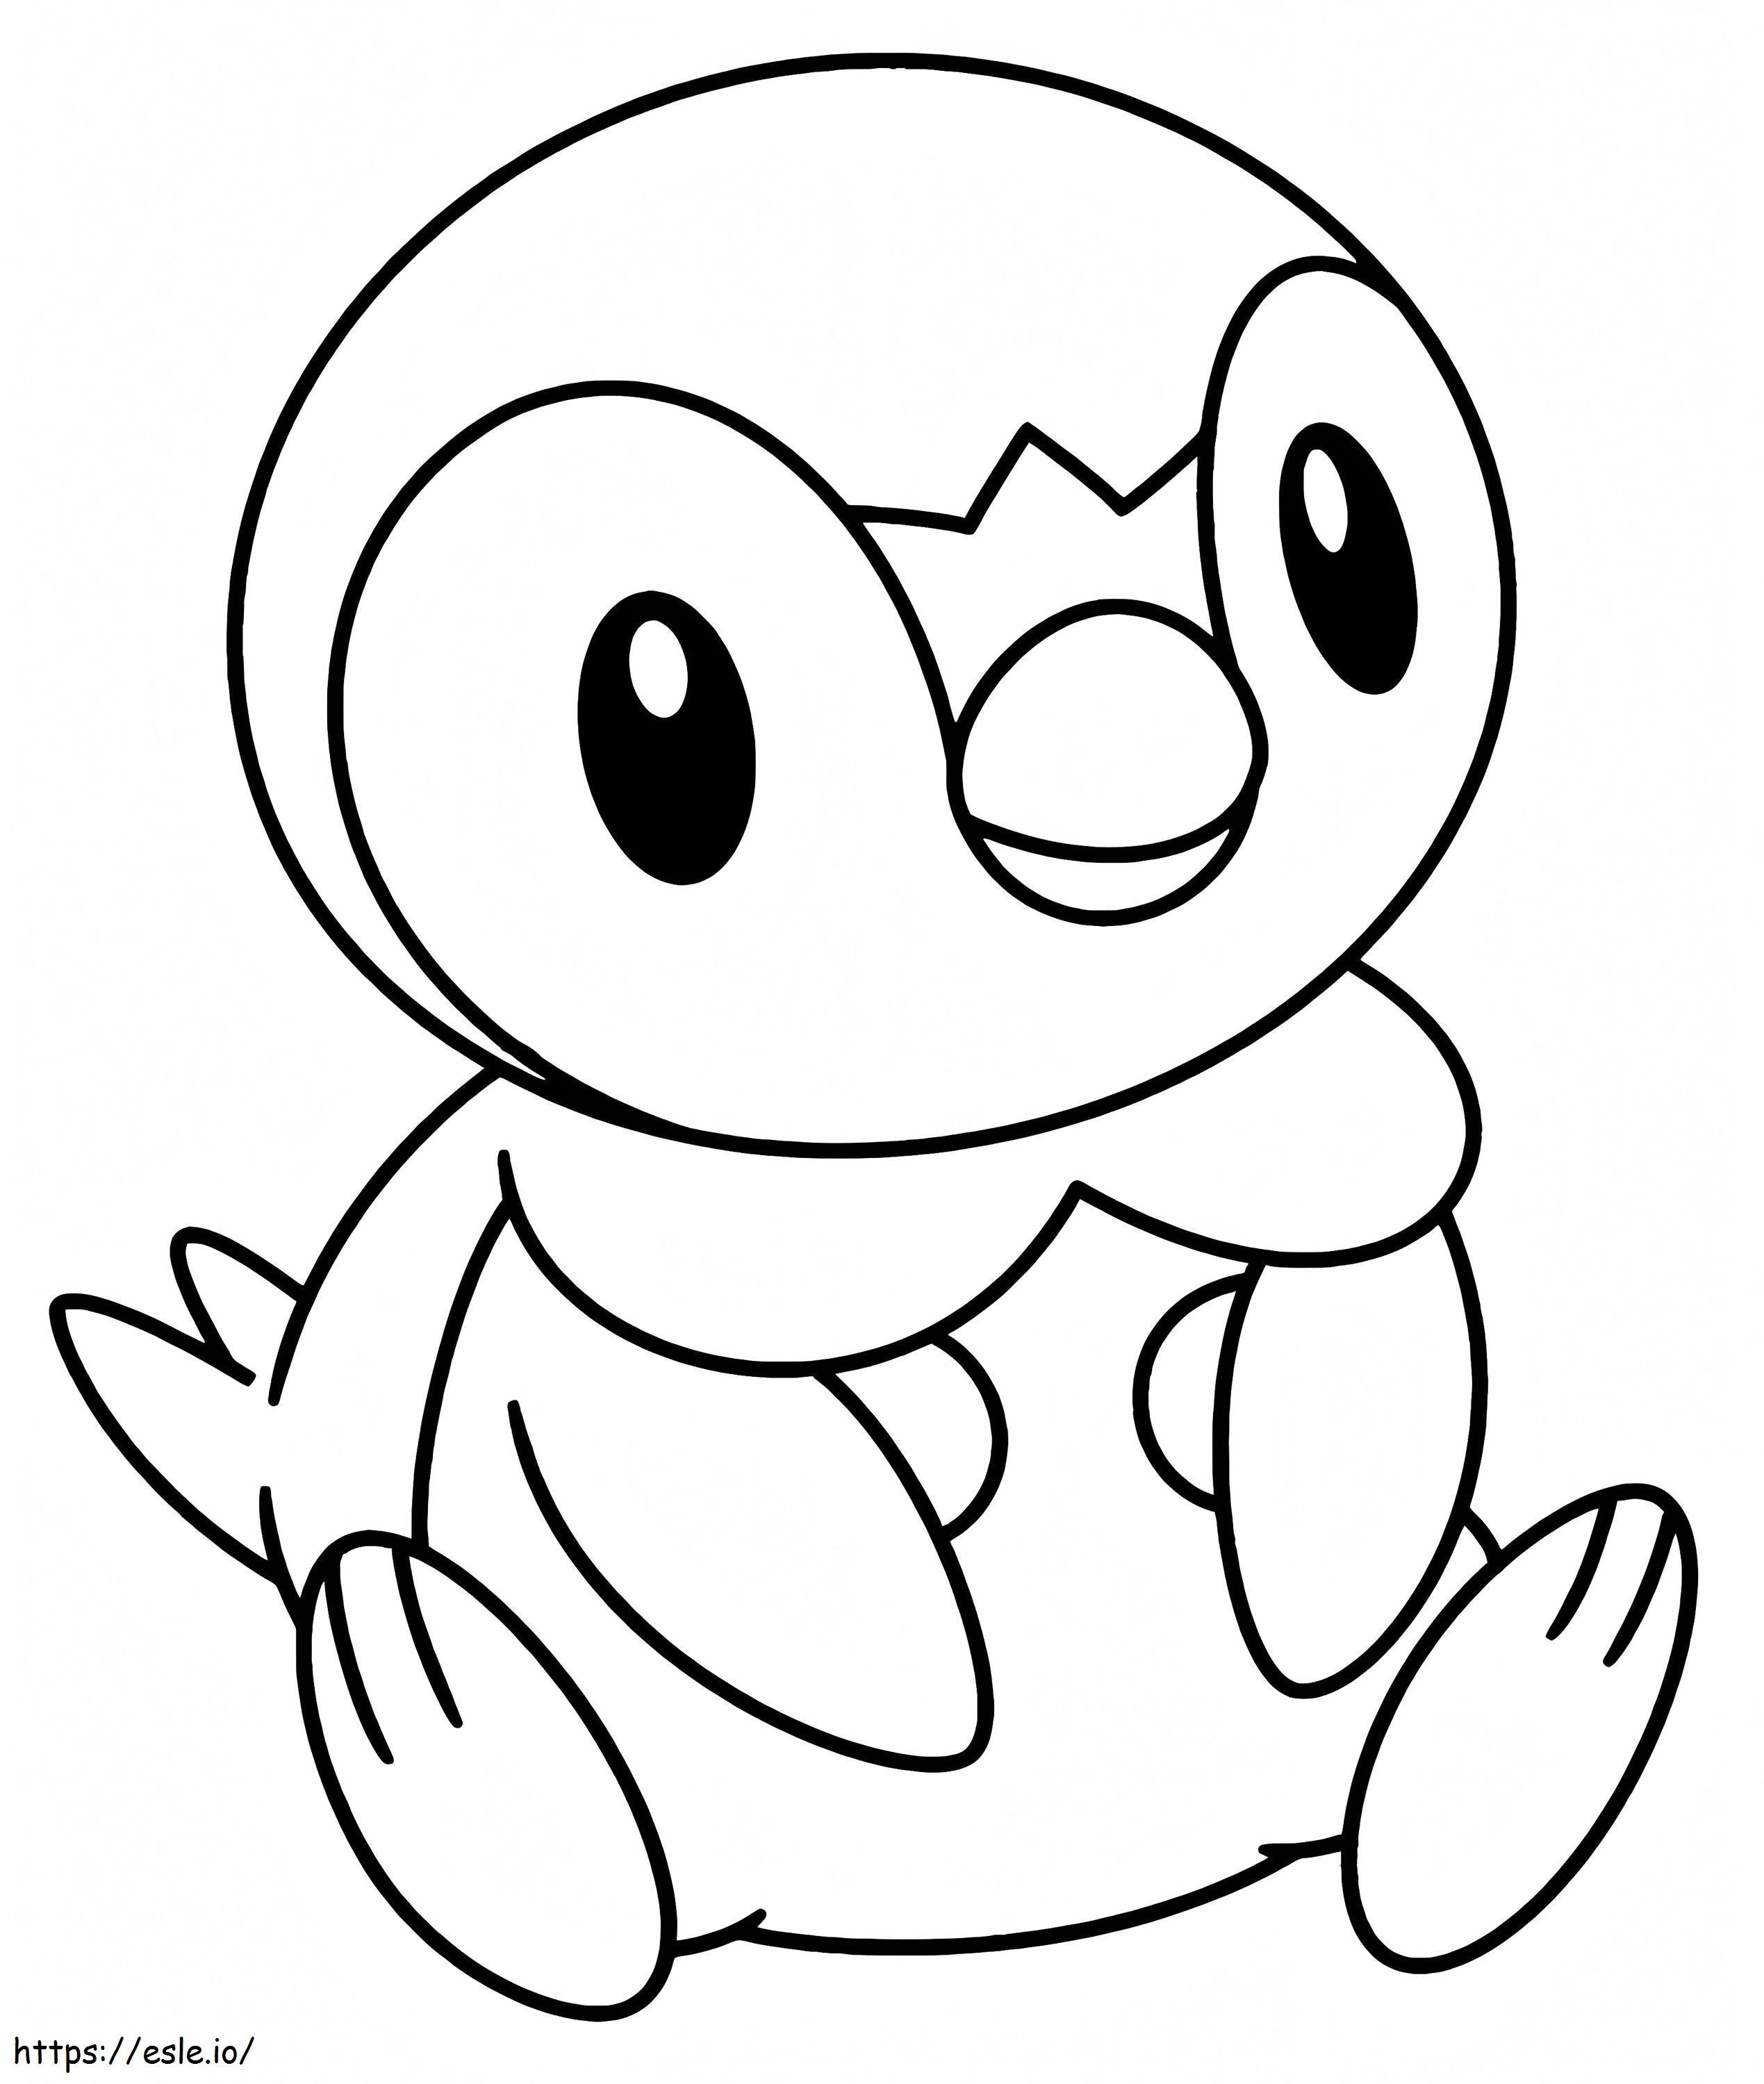 Adorable Piplup coloring page